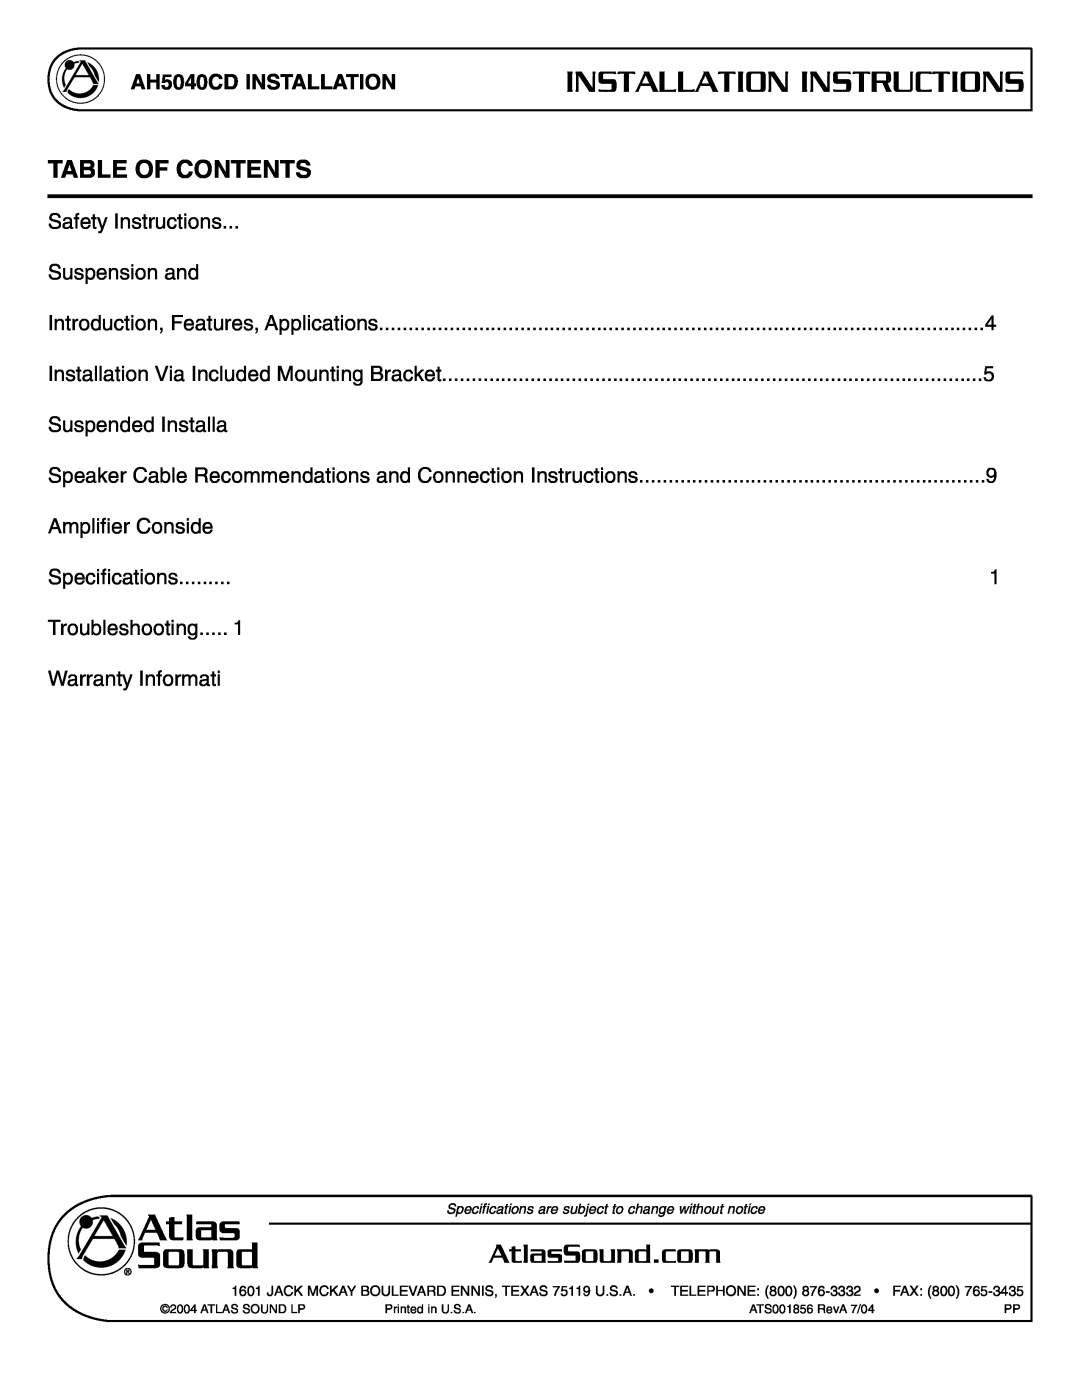 Atlas Sound AH5040CD specifications Installation Instructions, Table Of Contents 